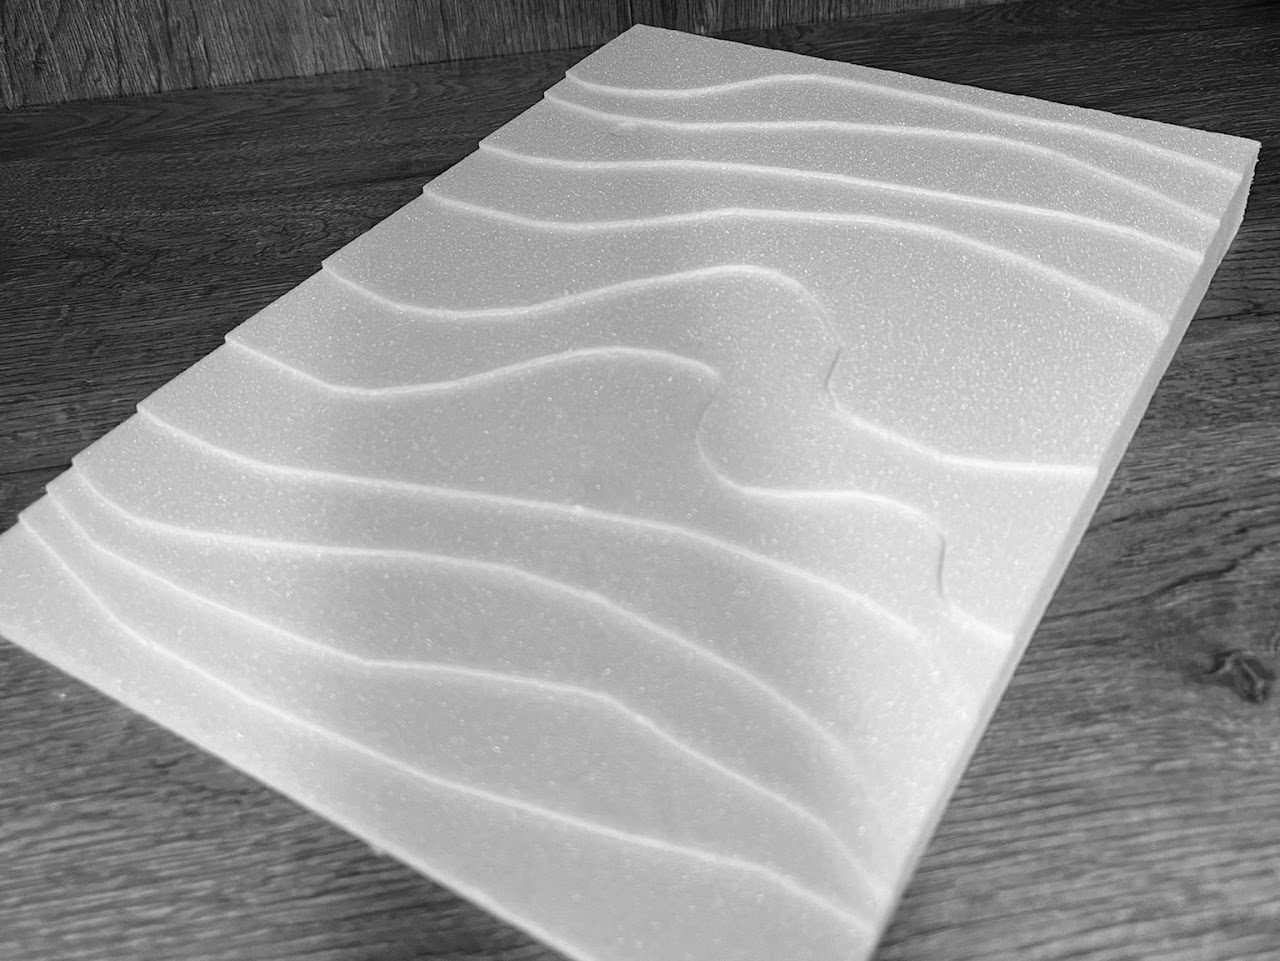 A flat surface with waves in it